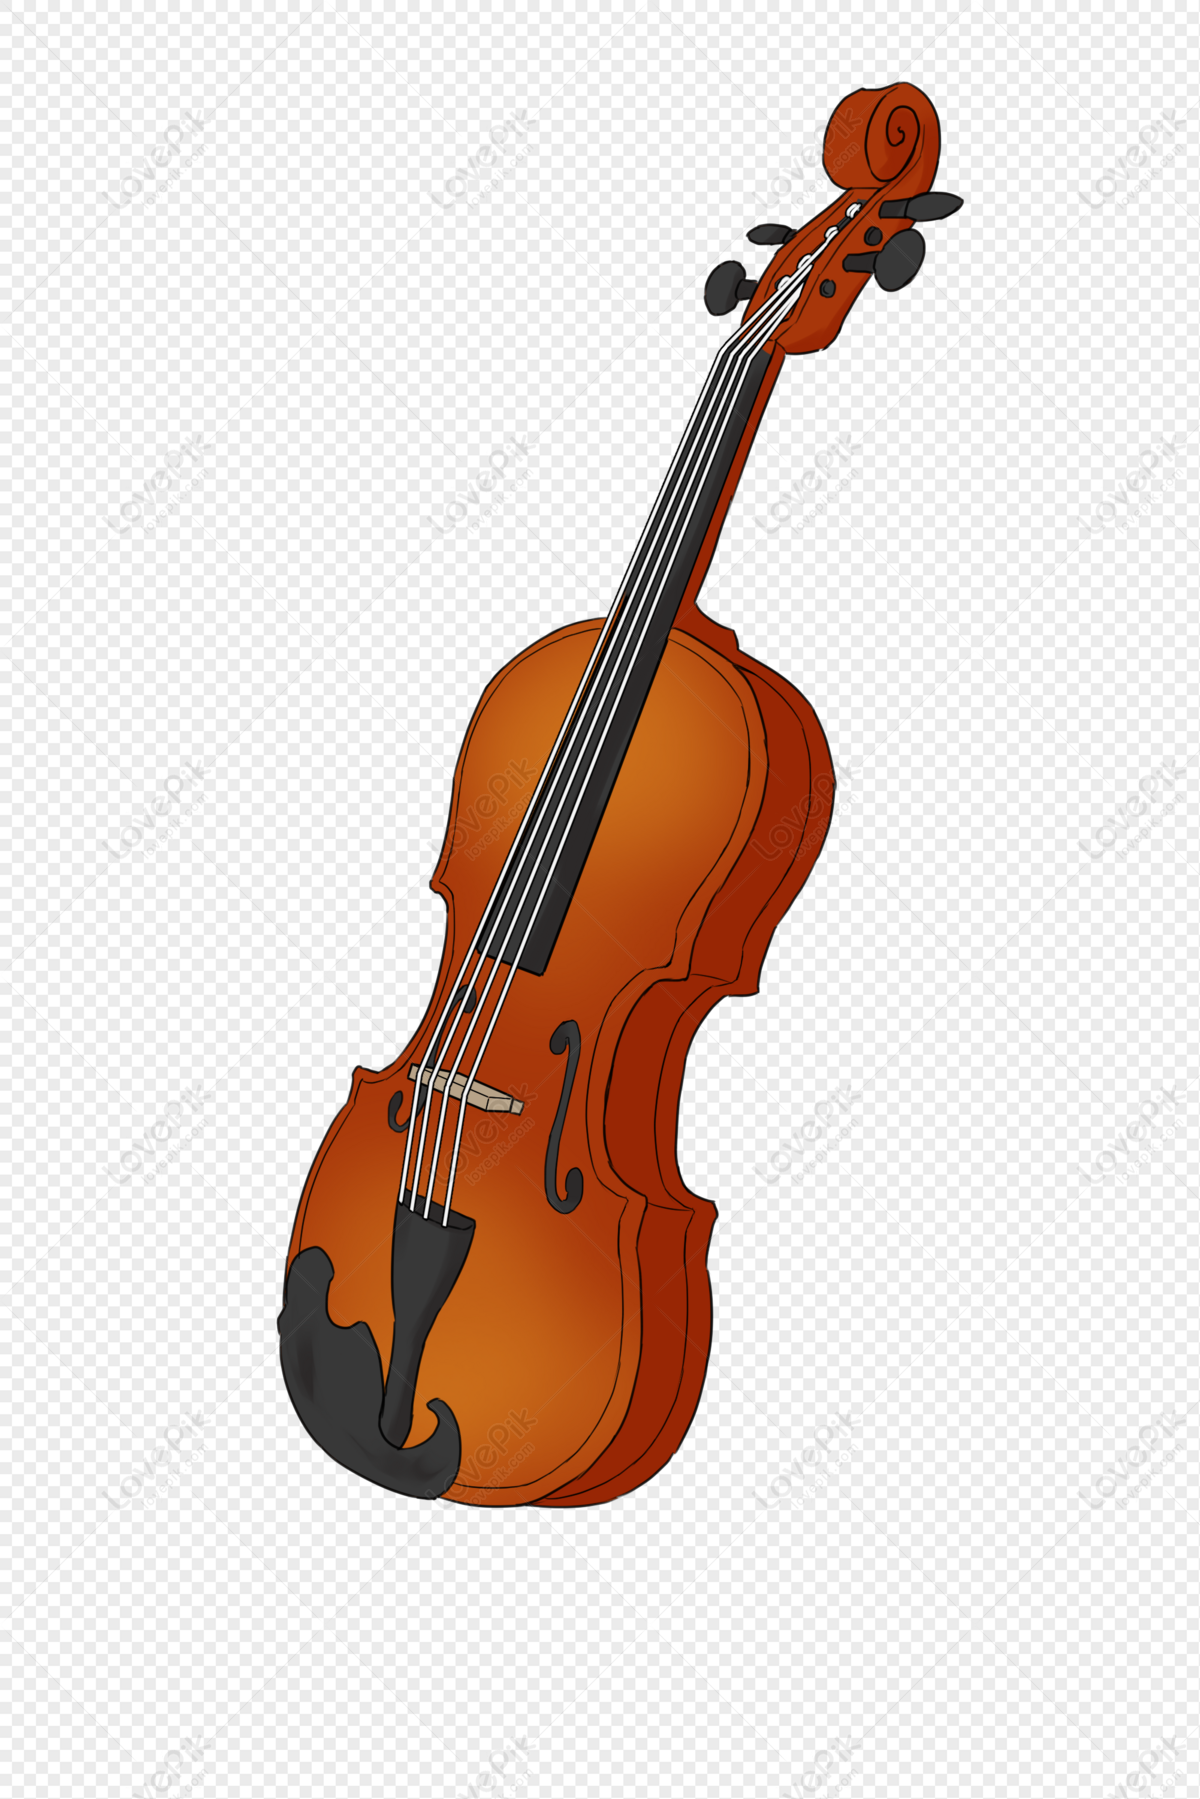 lovepik-hand-painted-violin-side-vector-free-material-png-image_401296140_wh1200